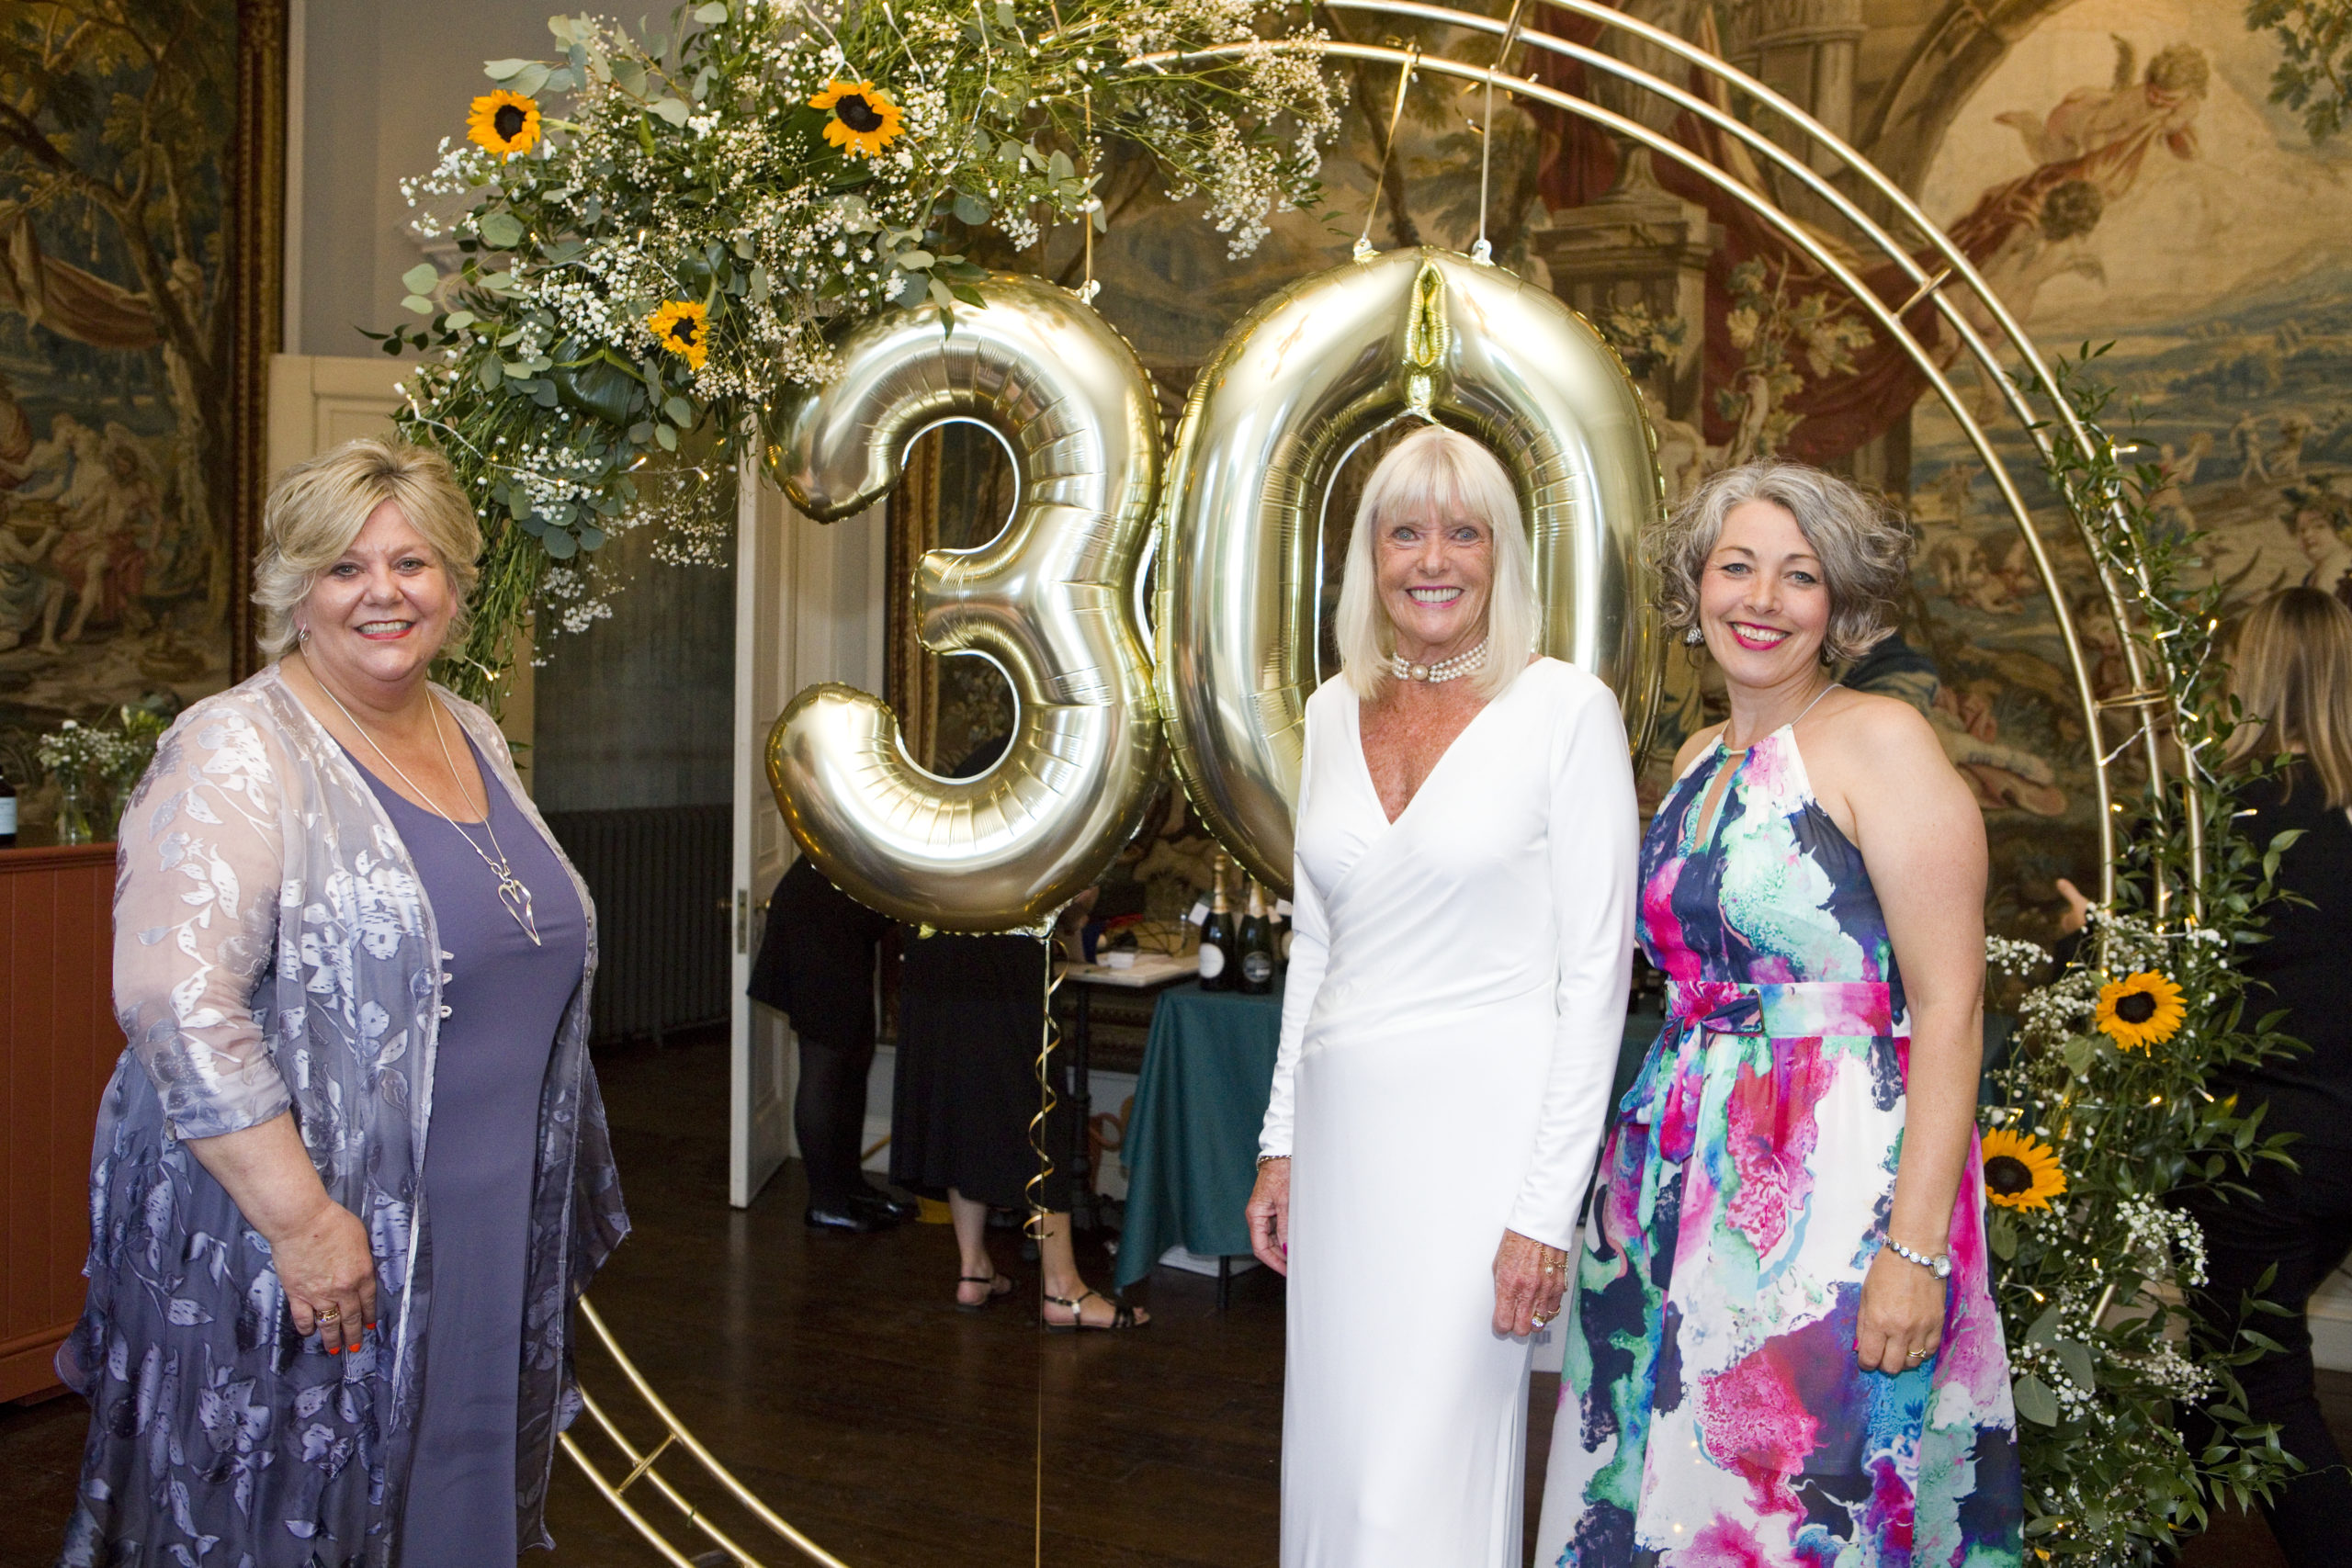 Lewis-Manning’s ‘Simply Fabulous’ 30th anniversary celebratory event reaches its fundraising target to fund a nurse for a year!